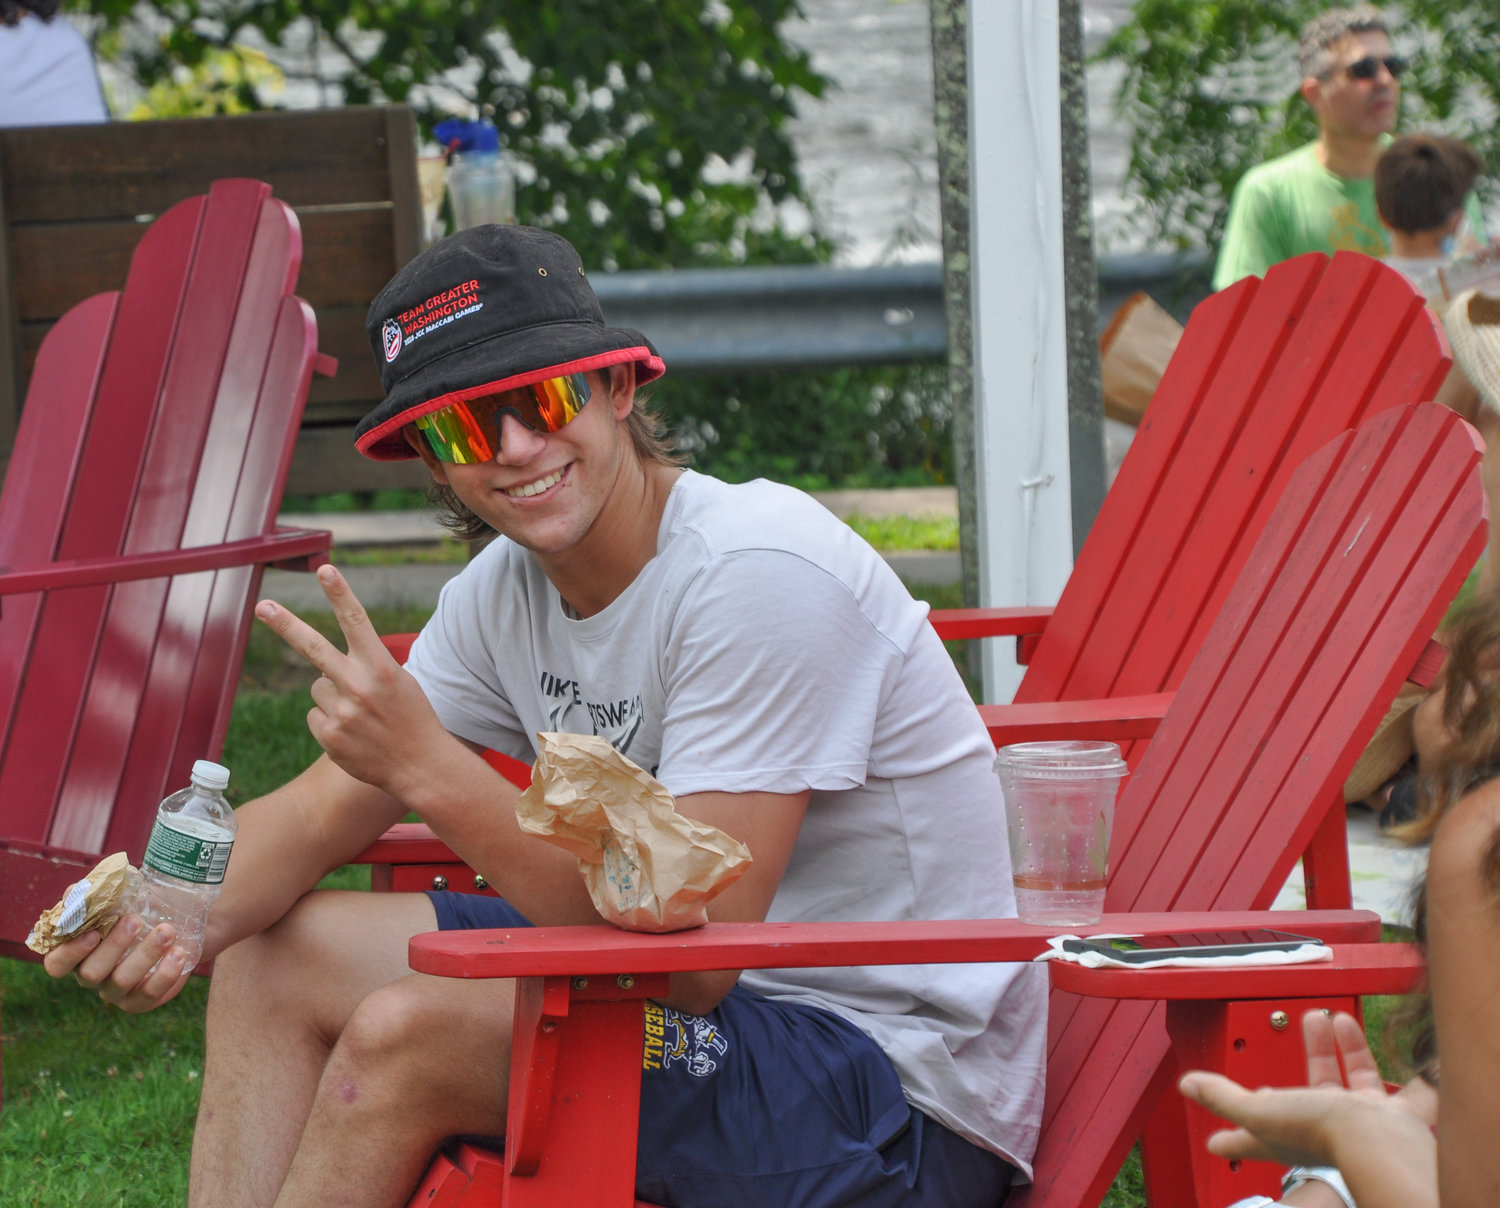 Undoubtedly, this unidentified young man was thinking about "banana splits and licorice," at the Barryville Farmers Market last Saturday. Look at that happy face!